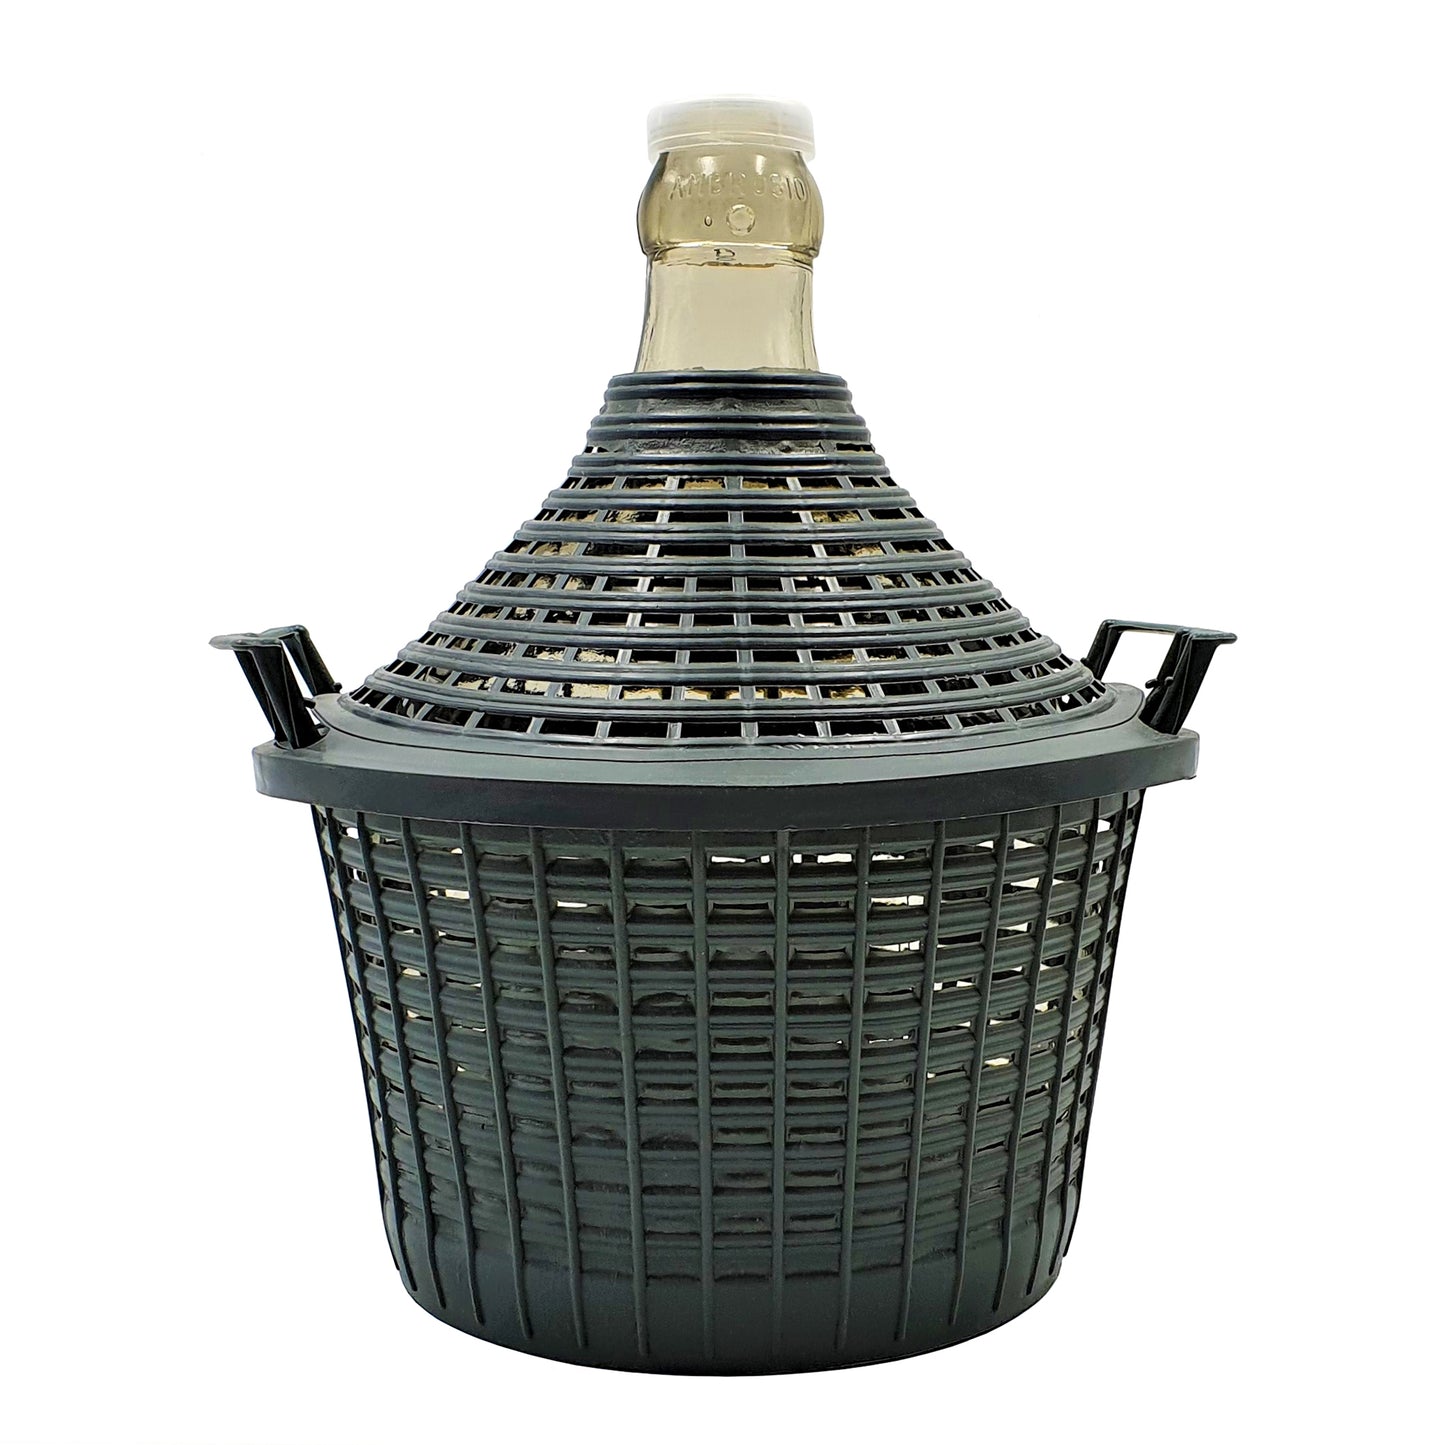 5 litre narrow neck demijohn with PVC basket and lid used for wine making